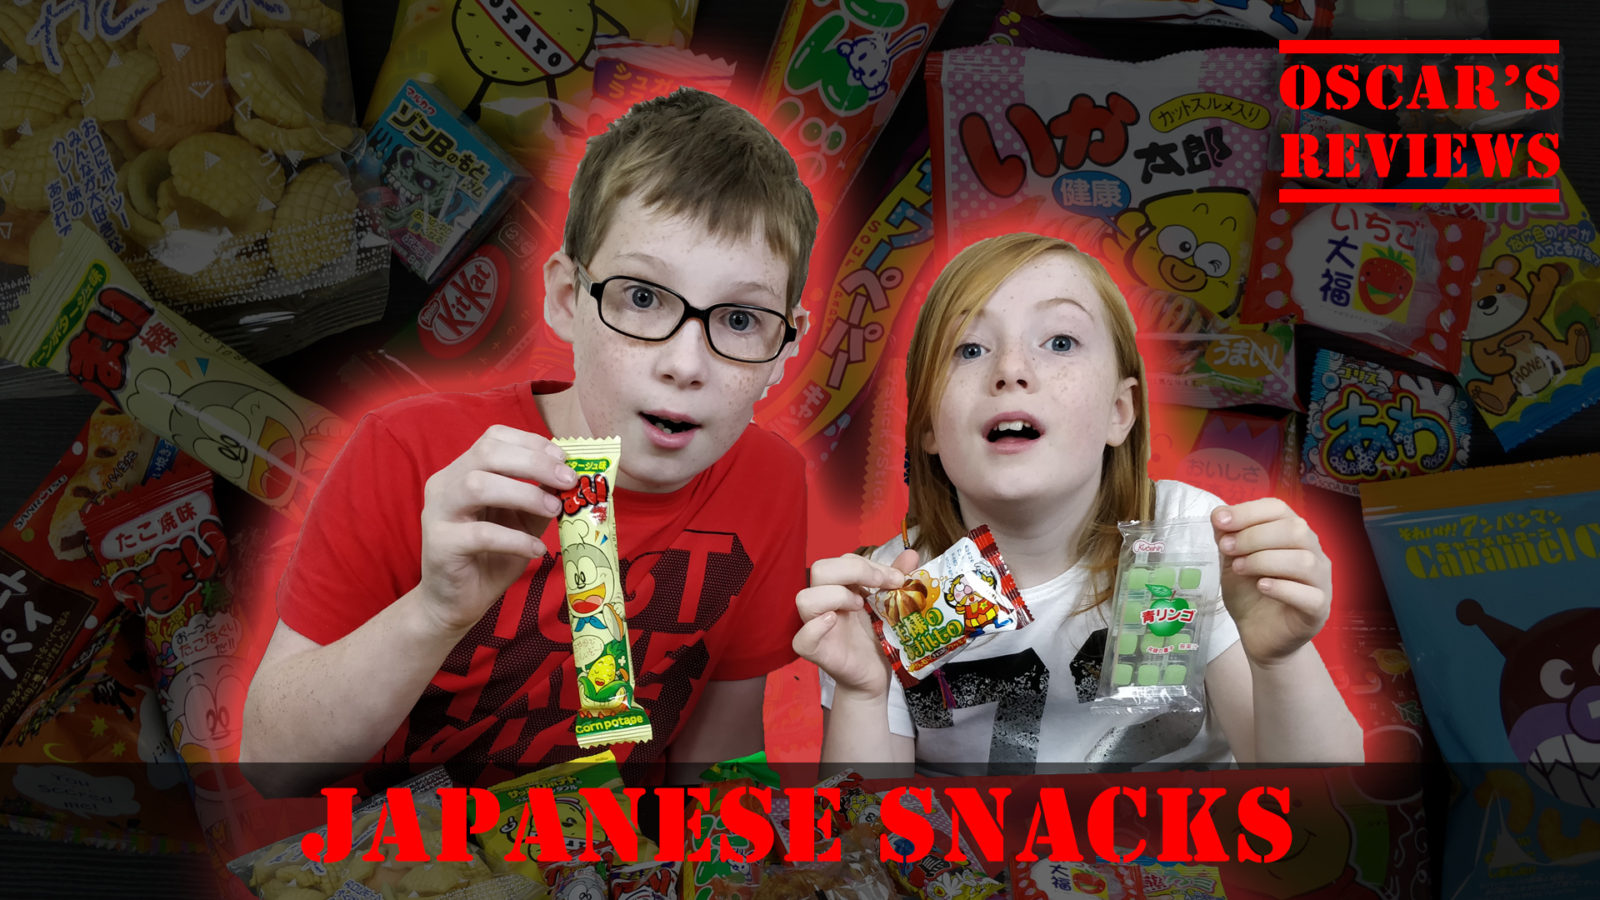 British Kids React to Weird and Gross Japanese Snacks and Candy